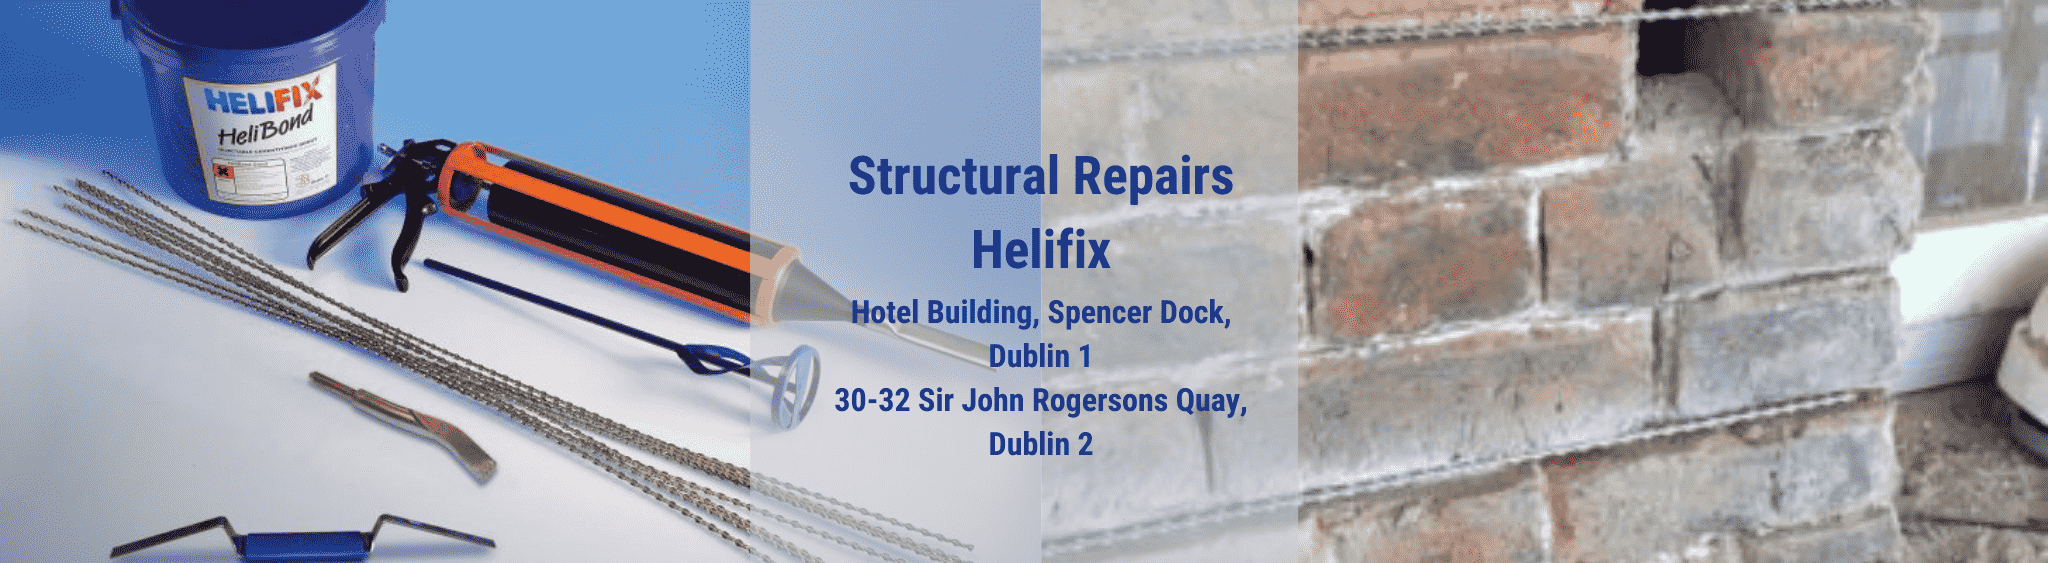 Structural Repairs Helifix